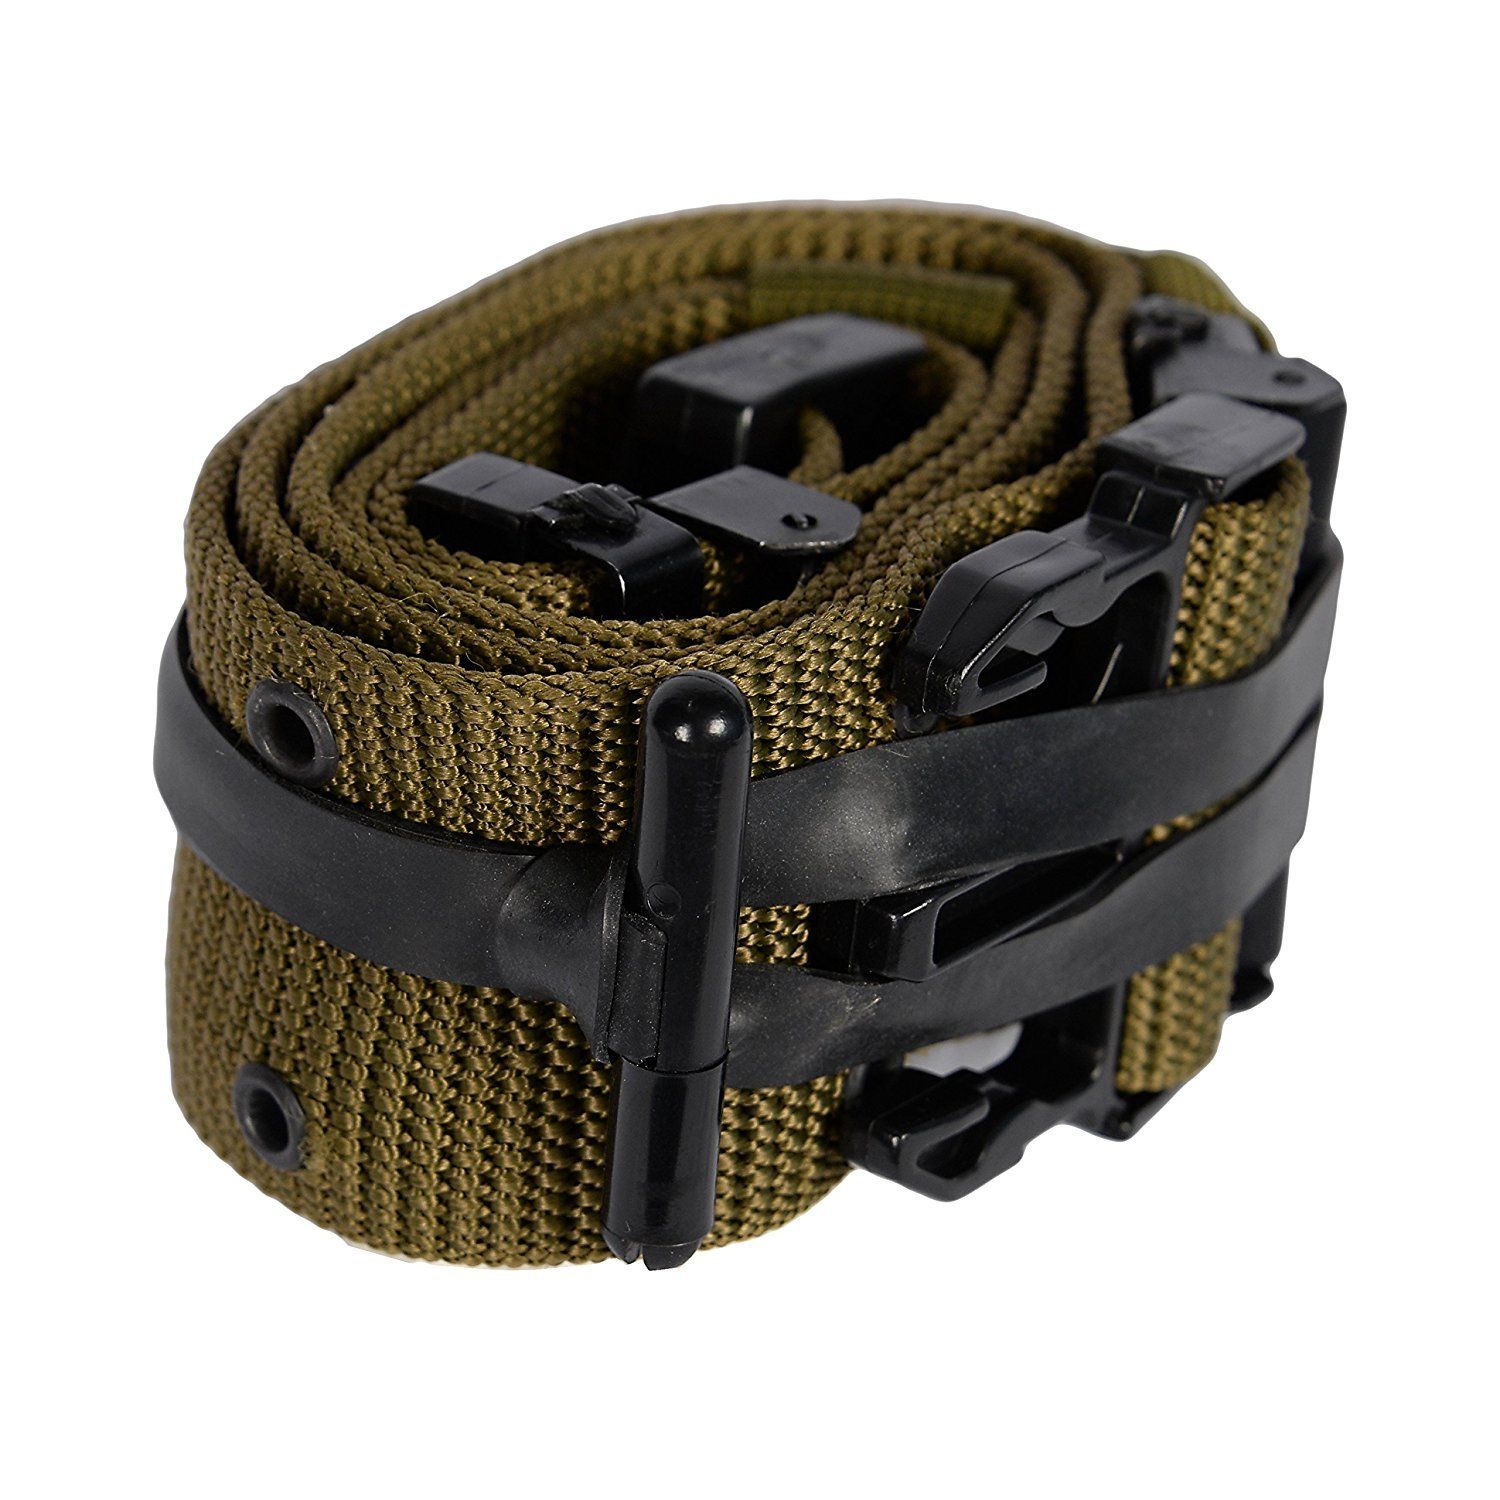 Secure ropes, cords, cables, hoses, lines, straps, bandoliers, magazines, bipods, belts, suspenders, antenna 